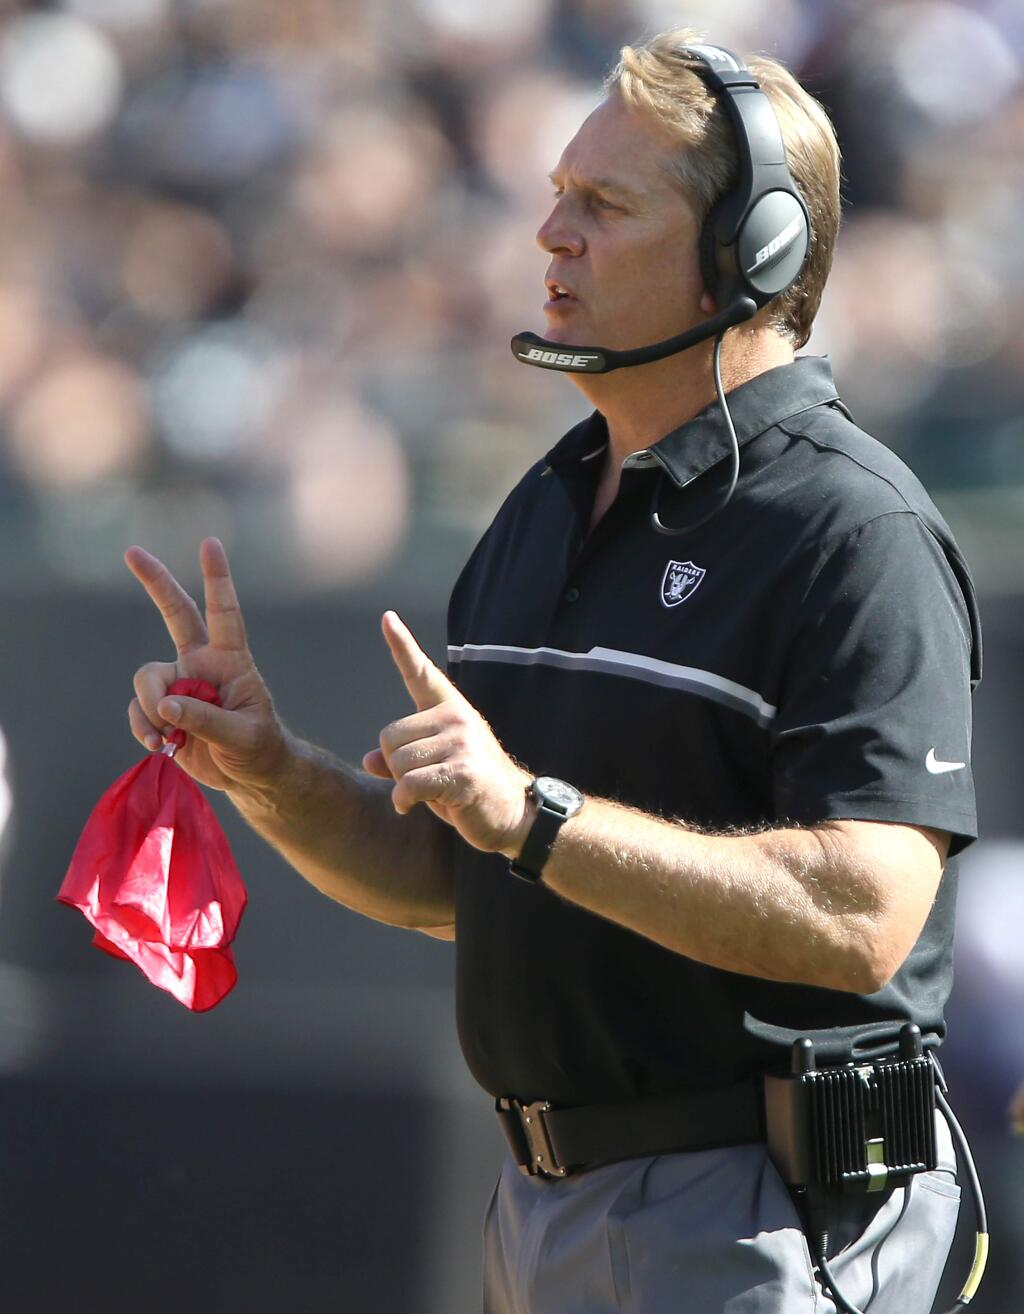 Oakland Raiders head coach Jack Del Rio challenges a call during their game against the Atlanta Falcons in Oakland on Sunday, September 18, 2016. The Raiders lost to the Falcons 35-28.(Christopher Chung/ The Press Democrat)